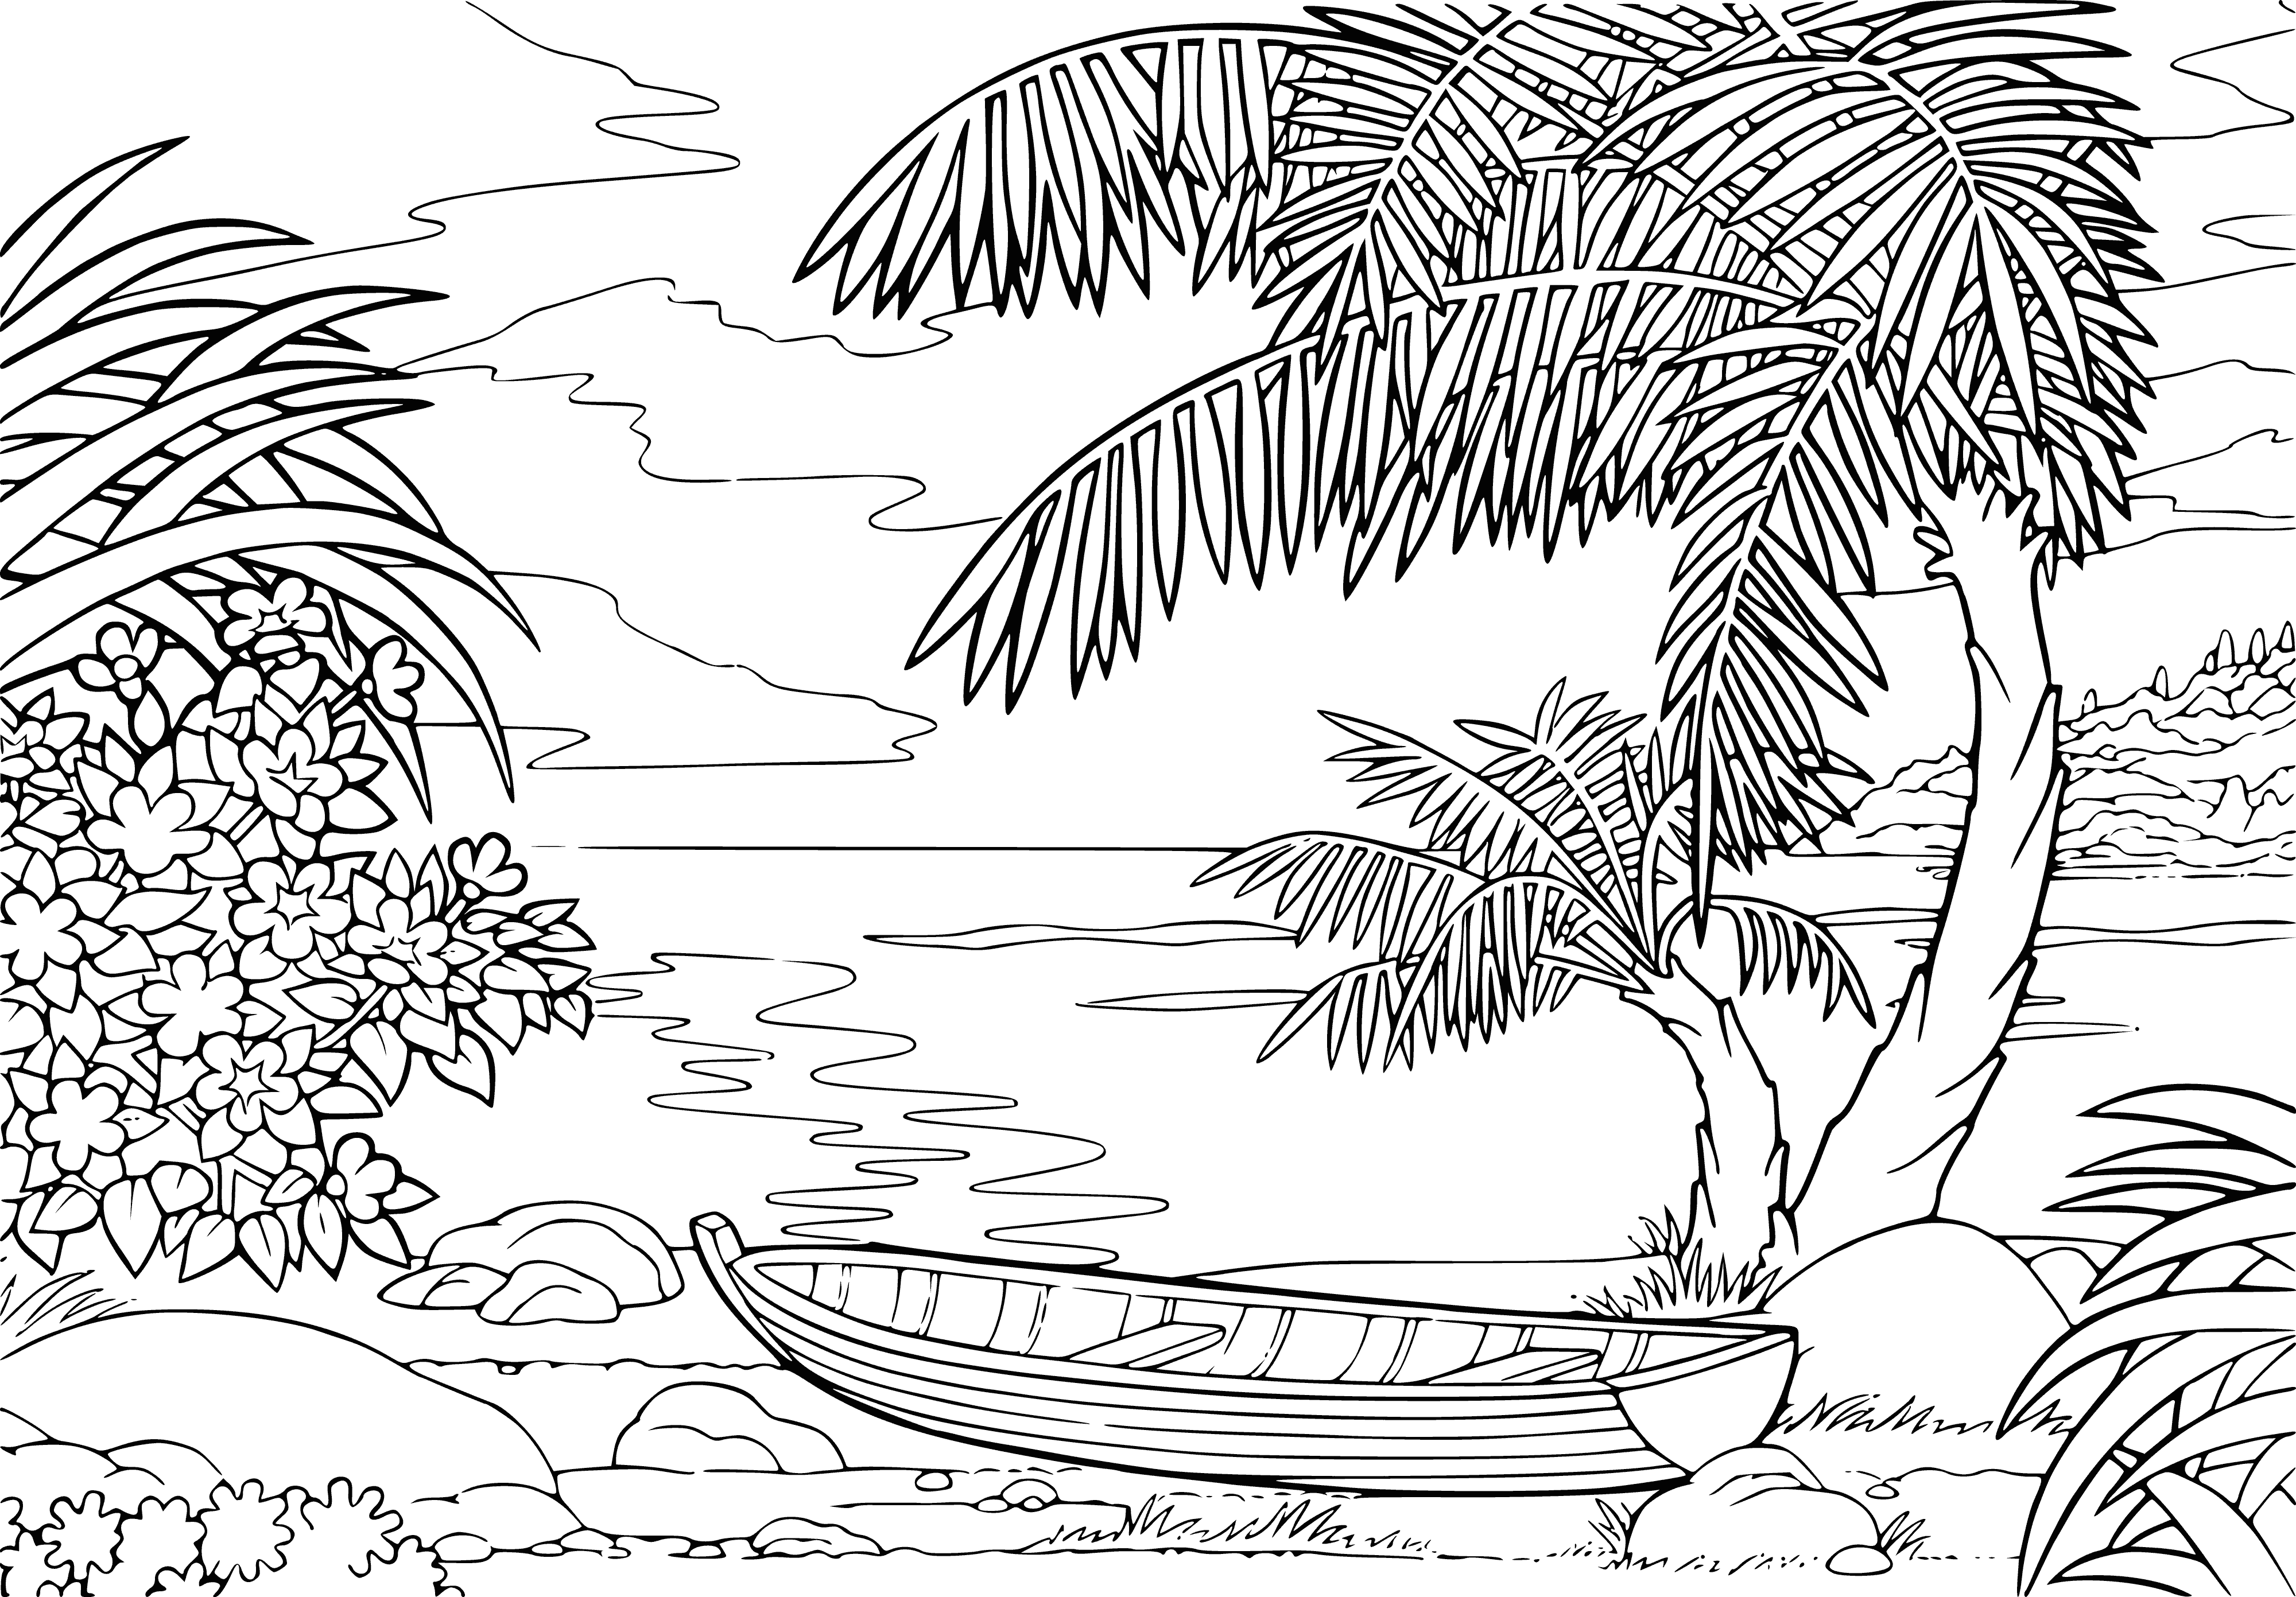 coloring page: A peaceful ocean scene with waves, a sunny sky, and an island with palms - the perfect setting to color. #ColorMeHappy